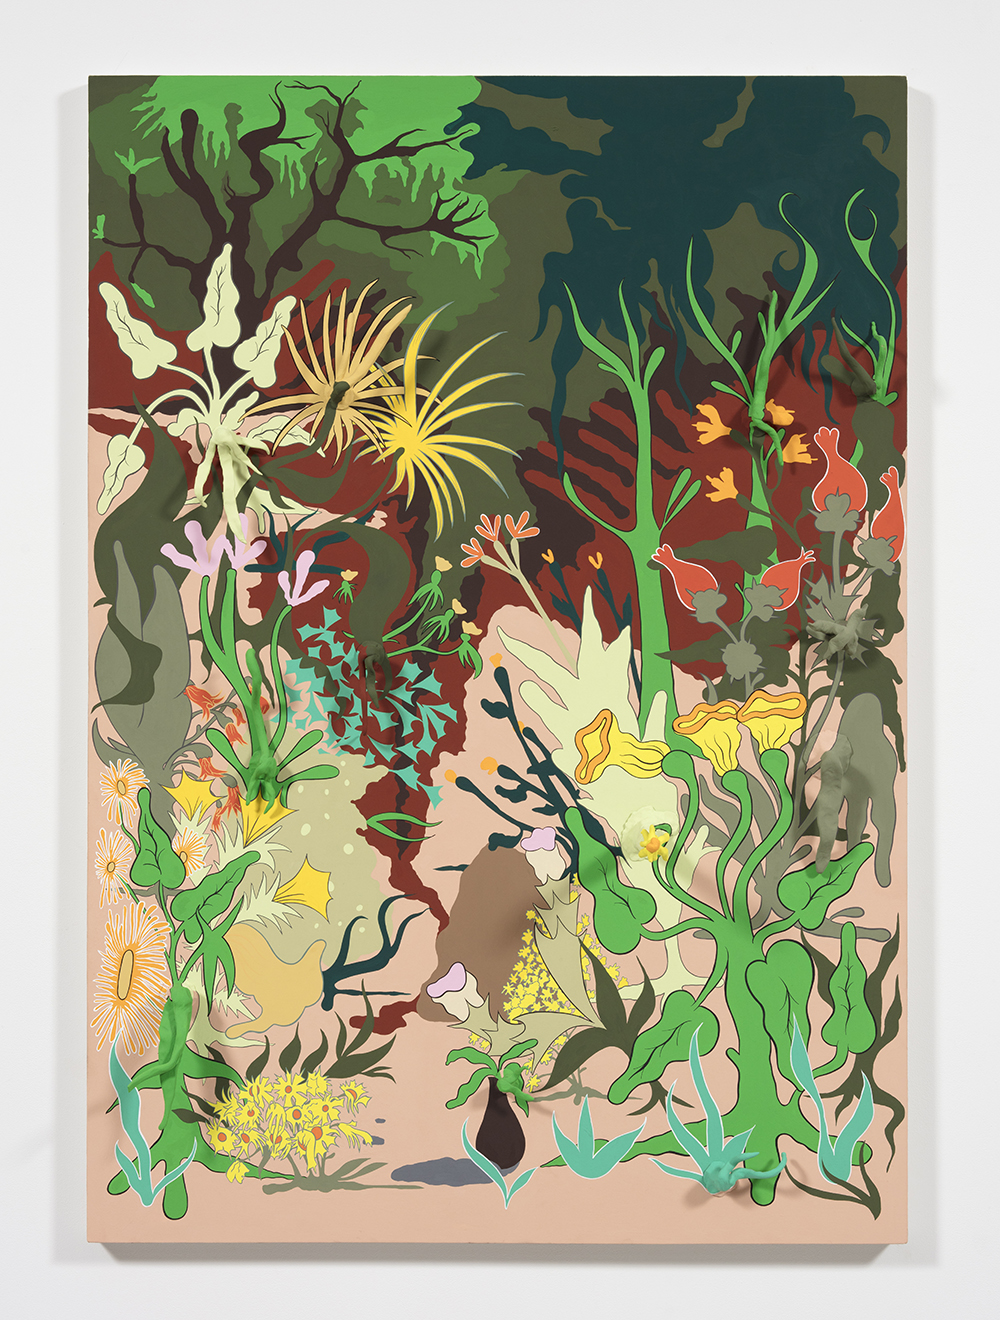 Chris Lux. <em>The Garden</em>, 2019. Flashe and epoxy resin on canvas on panel, 68 x 47 inches (172.7 x 119.4 cm)